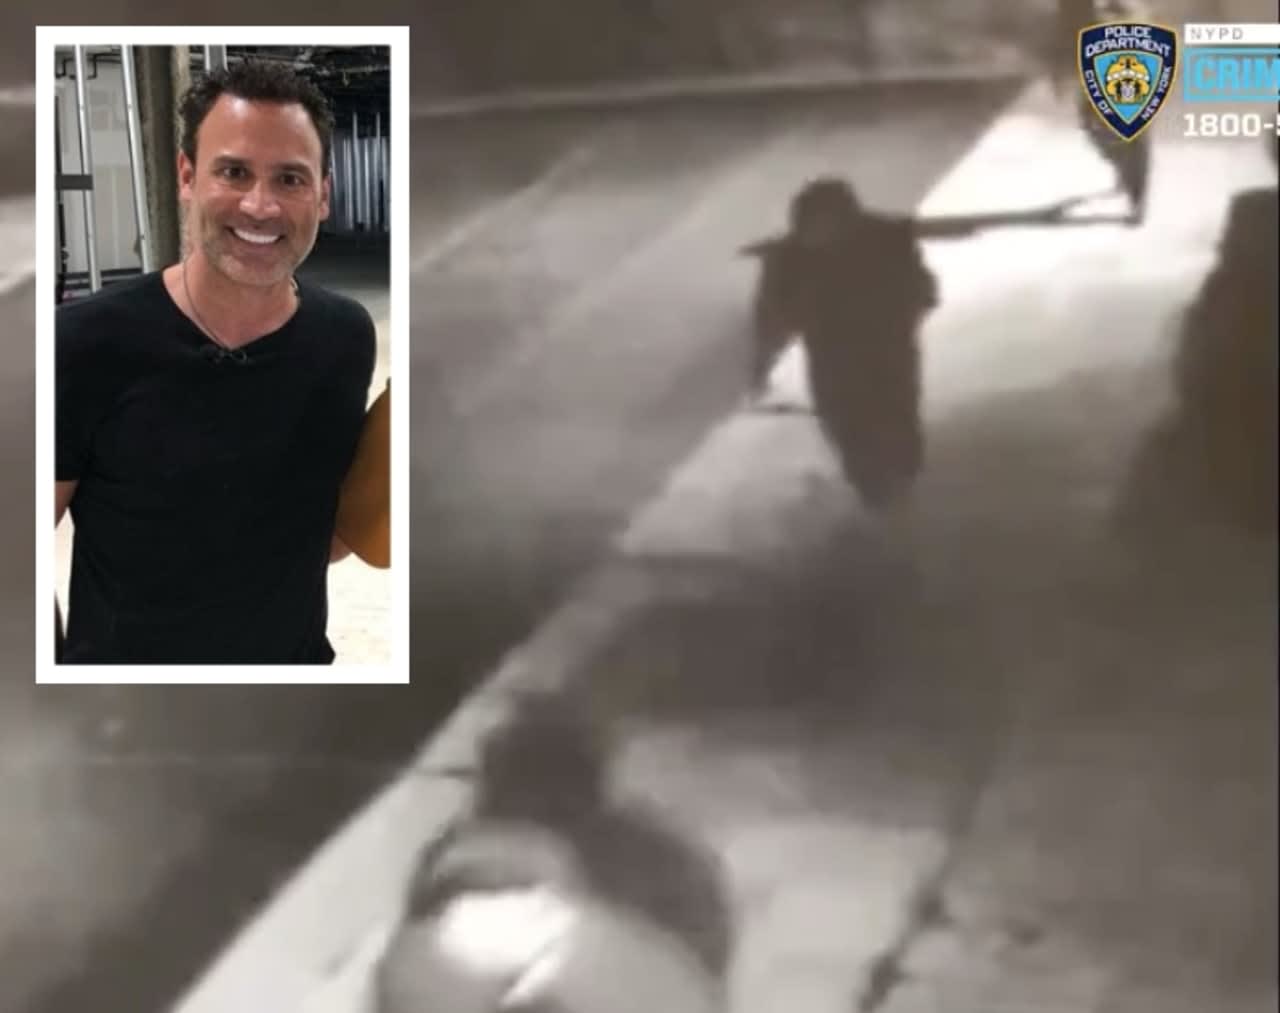 The NYPD Crime Stoppers released footage of the bandits who swiped handbags and jewelry from the Bronx home of American Dream mall CEO Don Ghermezian.